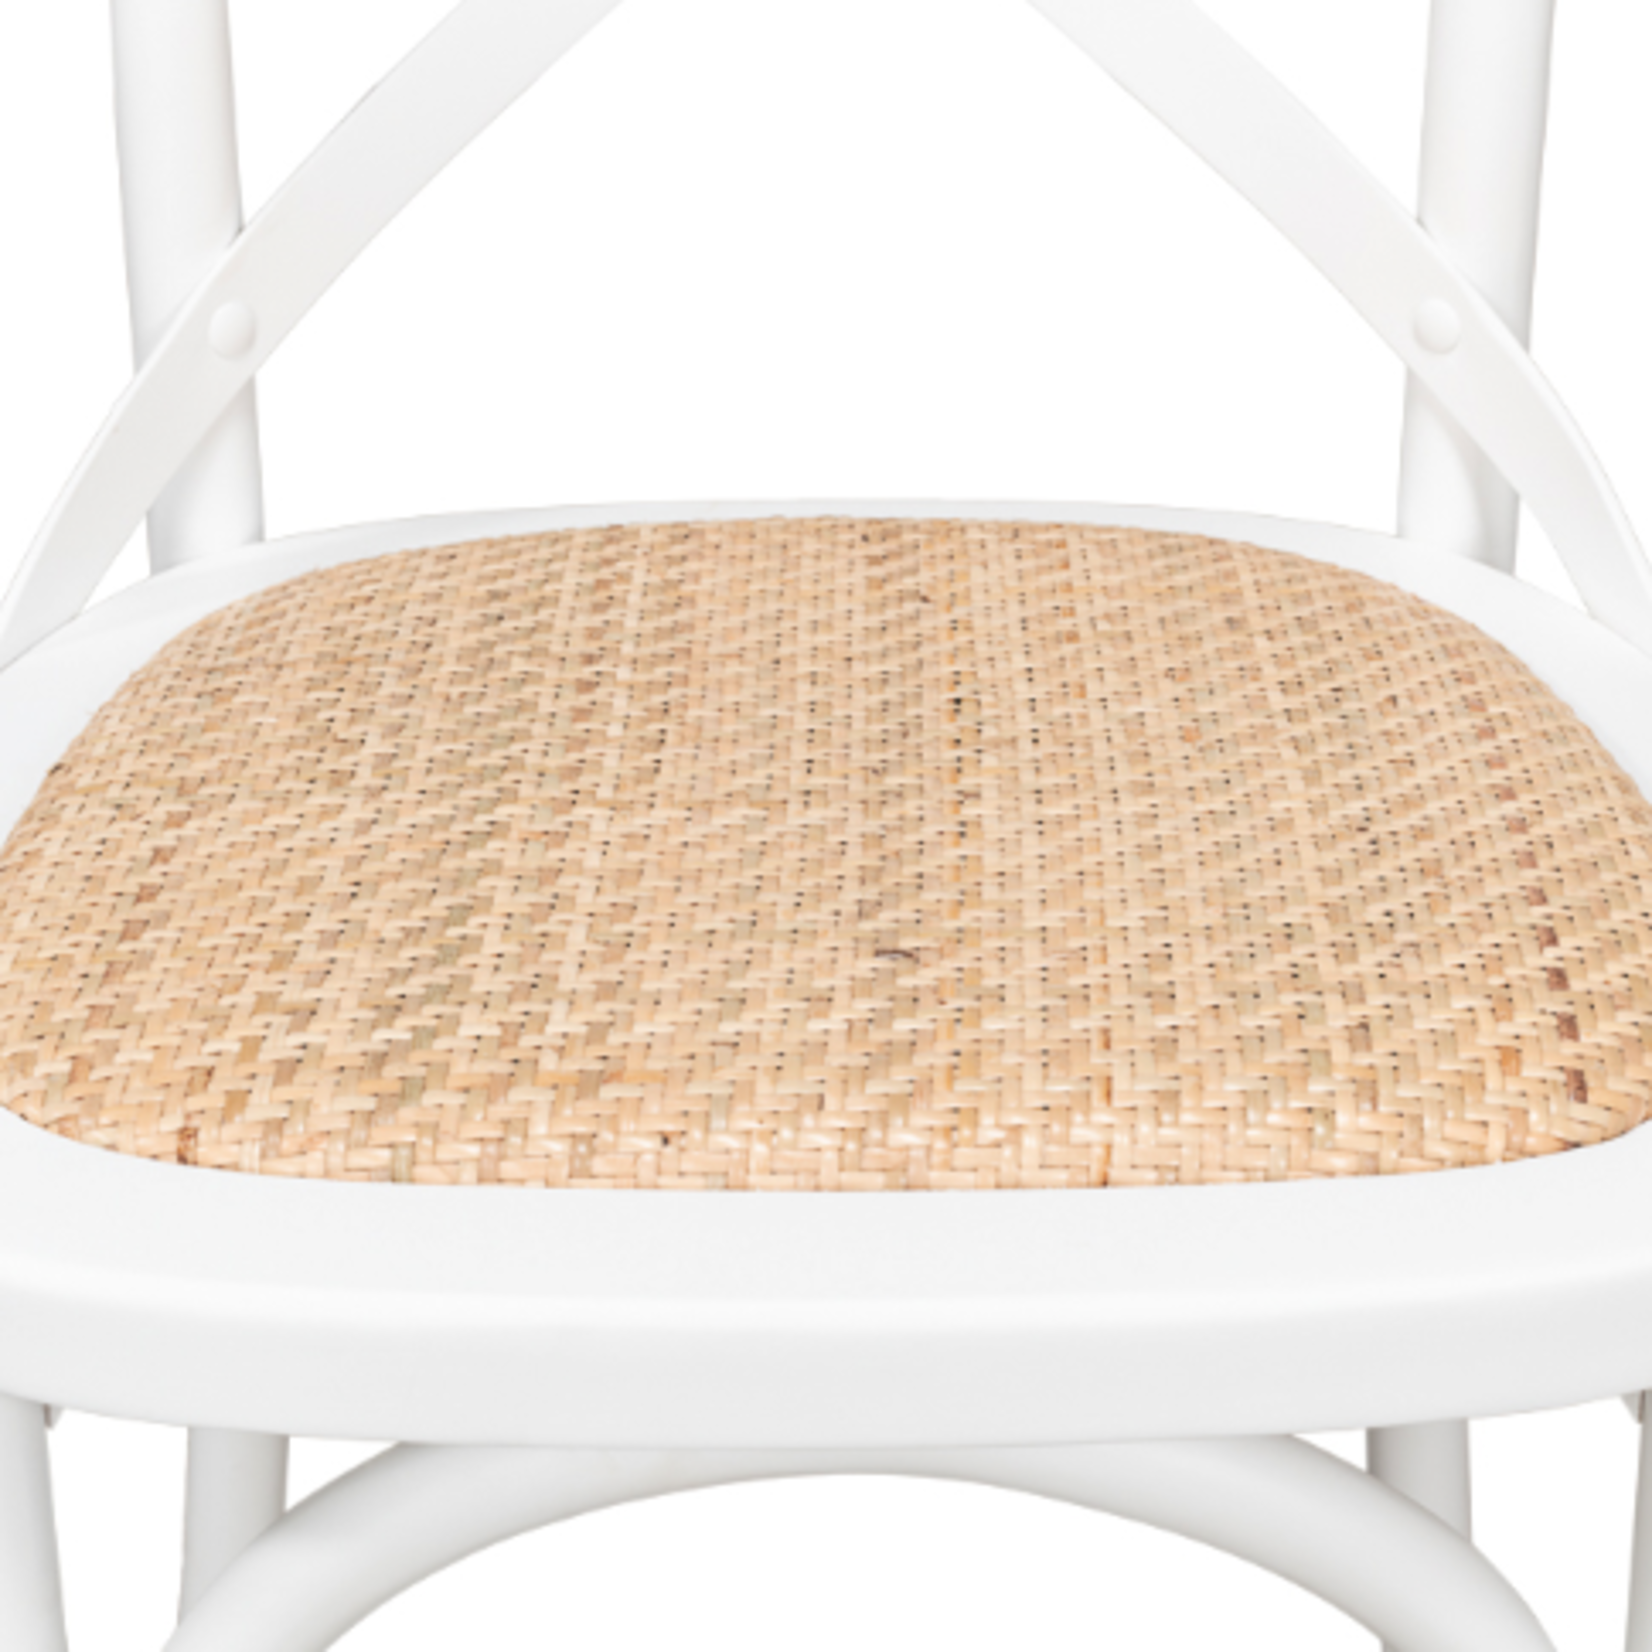 Outside The Box Tuileries Solid White Oak & Padded Woven Cane Dining Chair